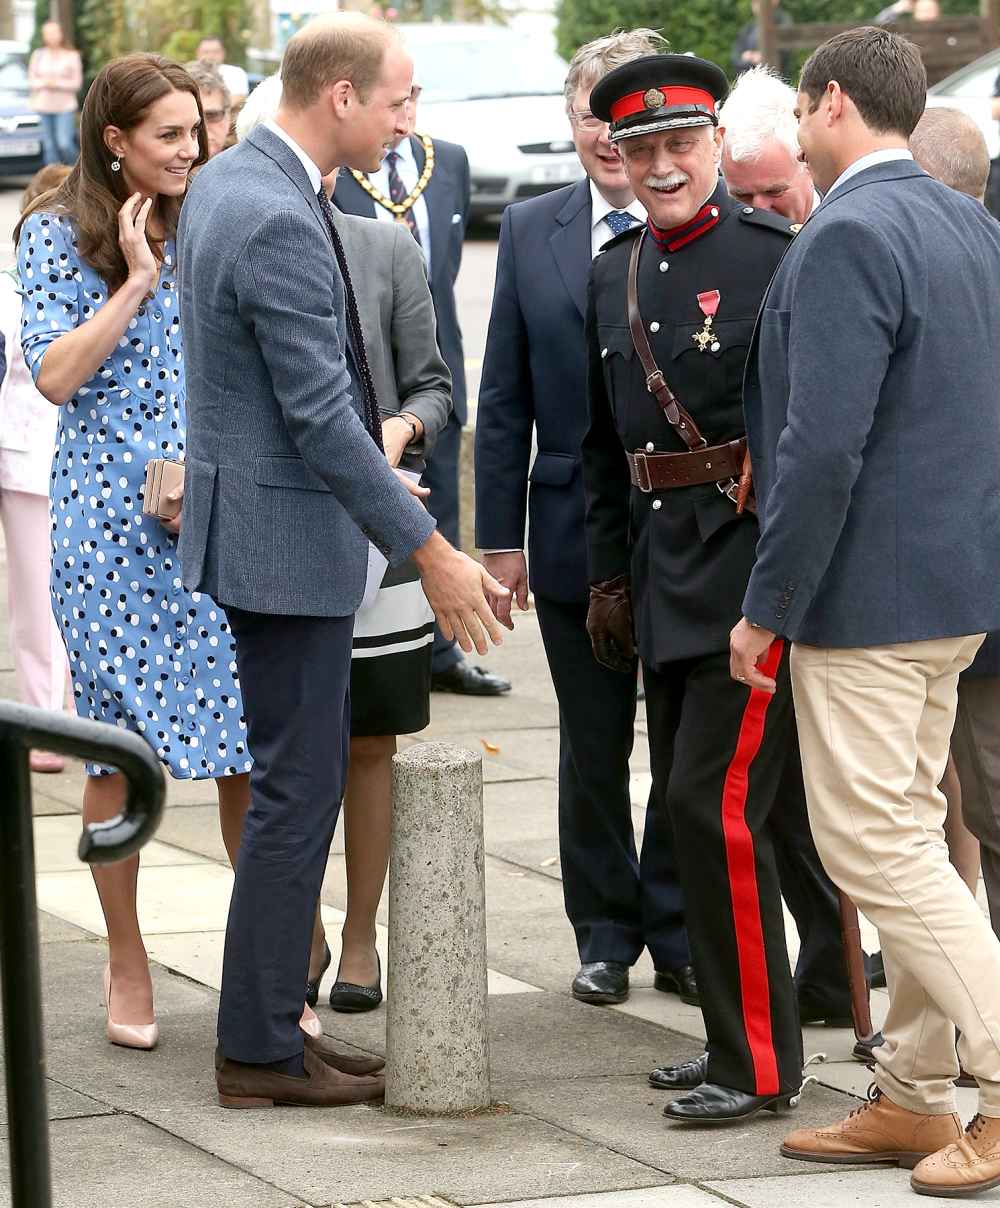 Catherine, Duchess of Cambridge and Prince William, Duke of Cambridge helped up Johnathen Douglas Hughes after he fell over during there visit at Stewards Academy on September 16, 2016 in Harlow, England.